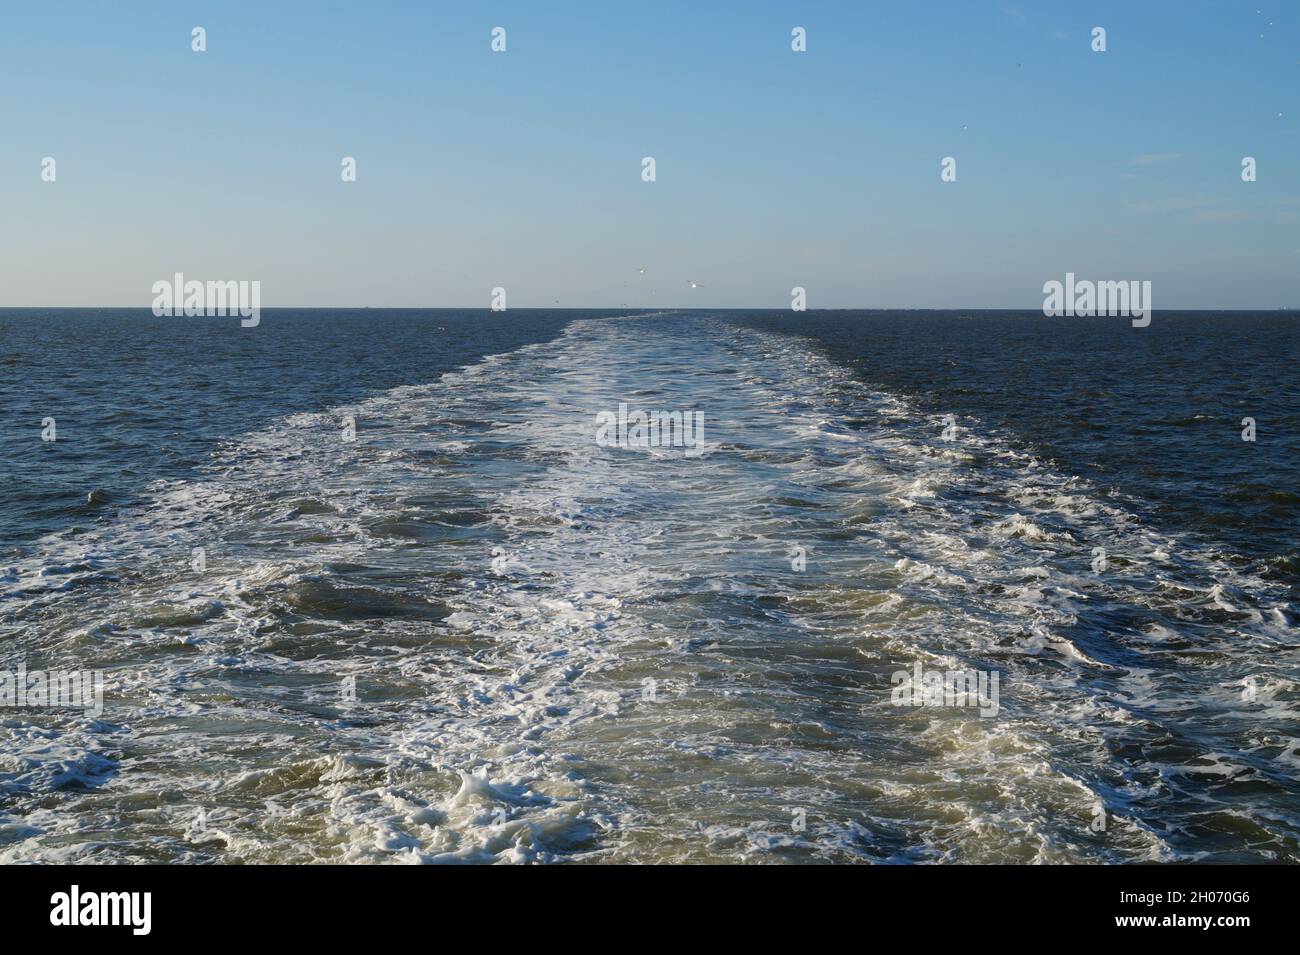 The picturesque the North Sea in Germany Stock Photo